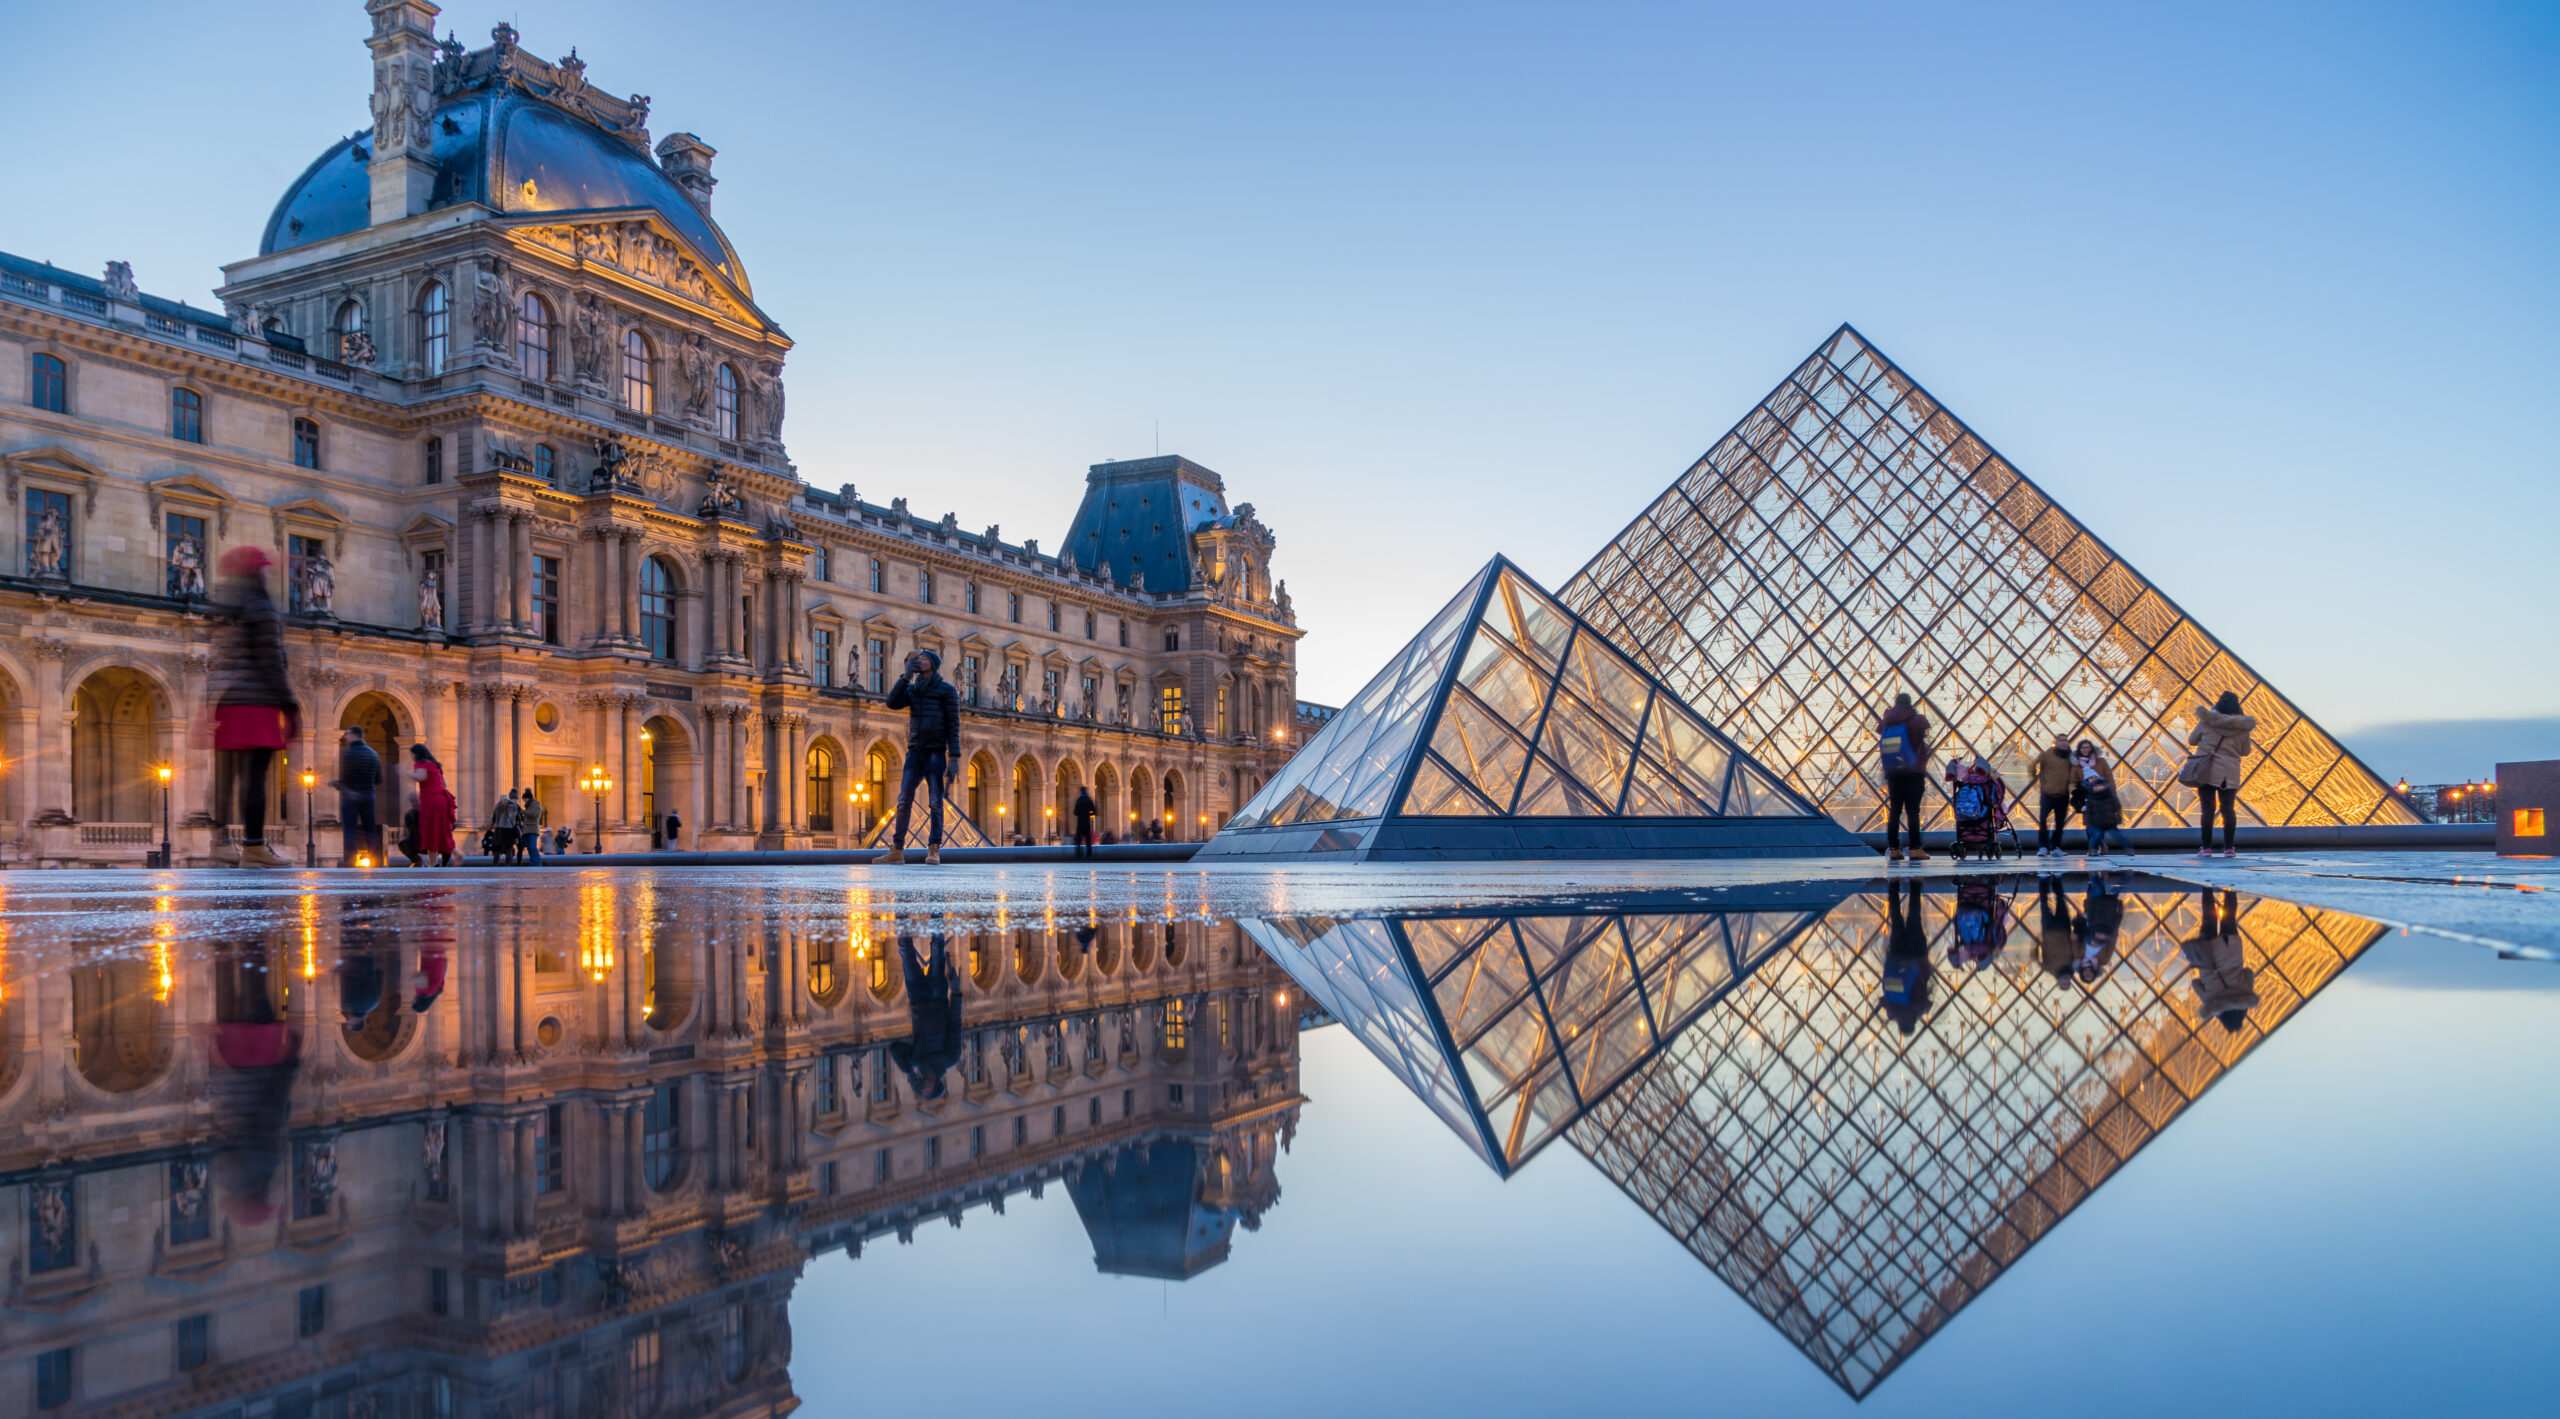 PARIS, FRANCE - DECEMBER 08, 2017: View of famous Louvre Museum with Louvre Pyramid at evening. Louvre Museum is one of the largest and most visited museums worldwide